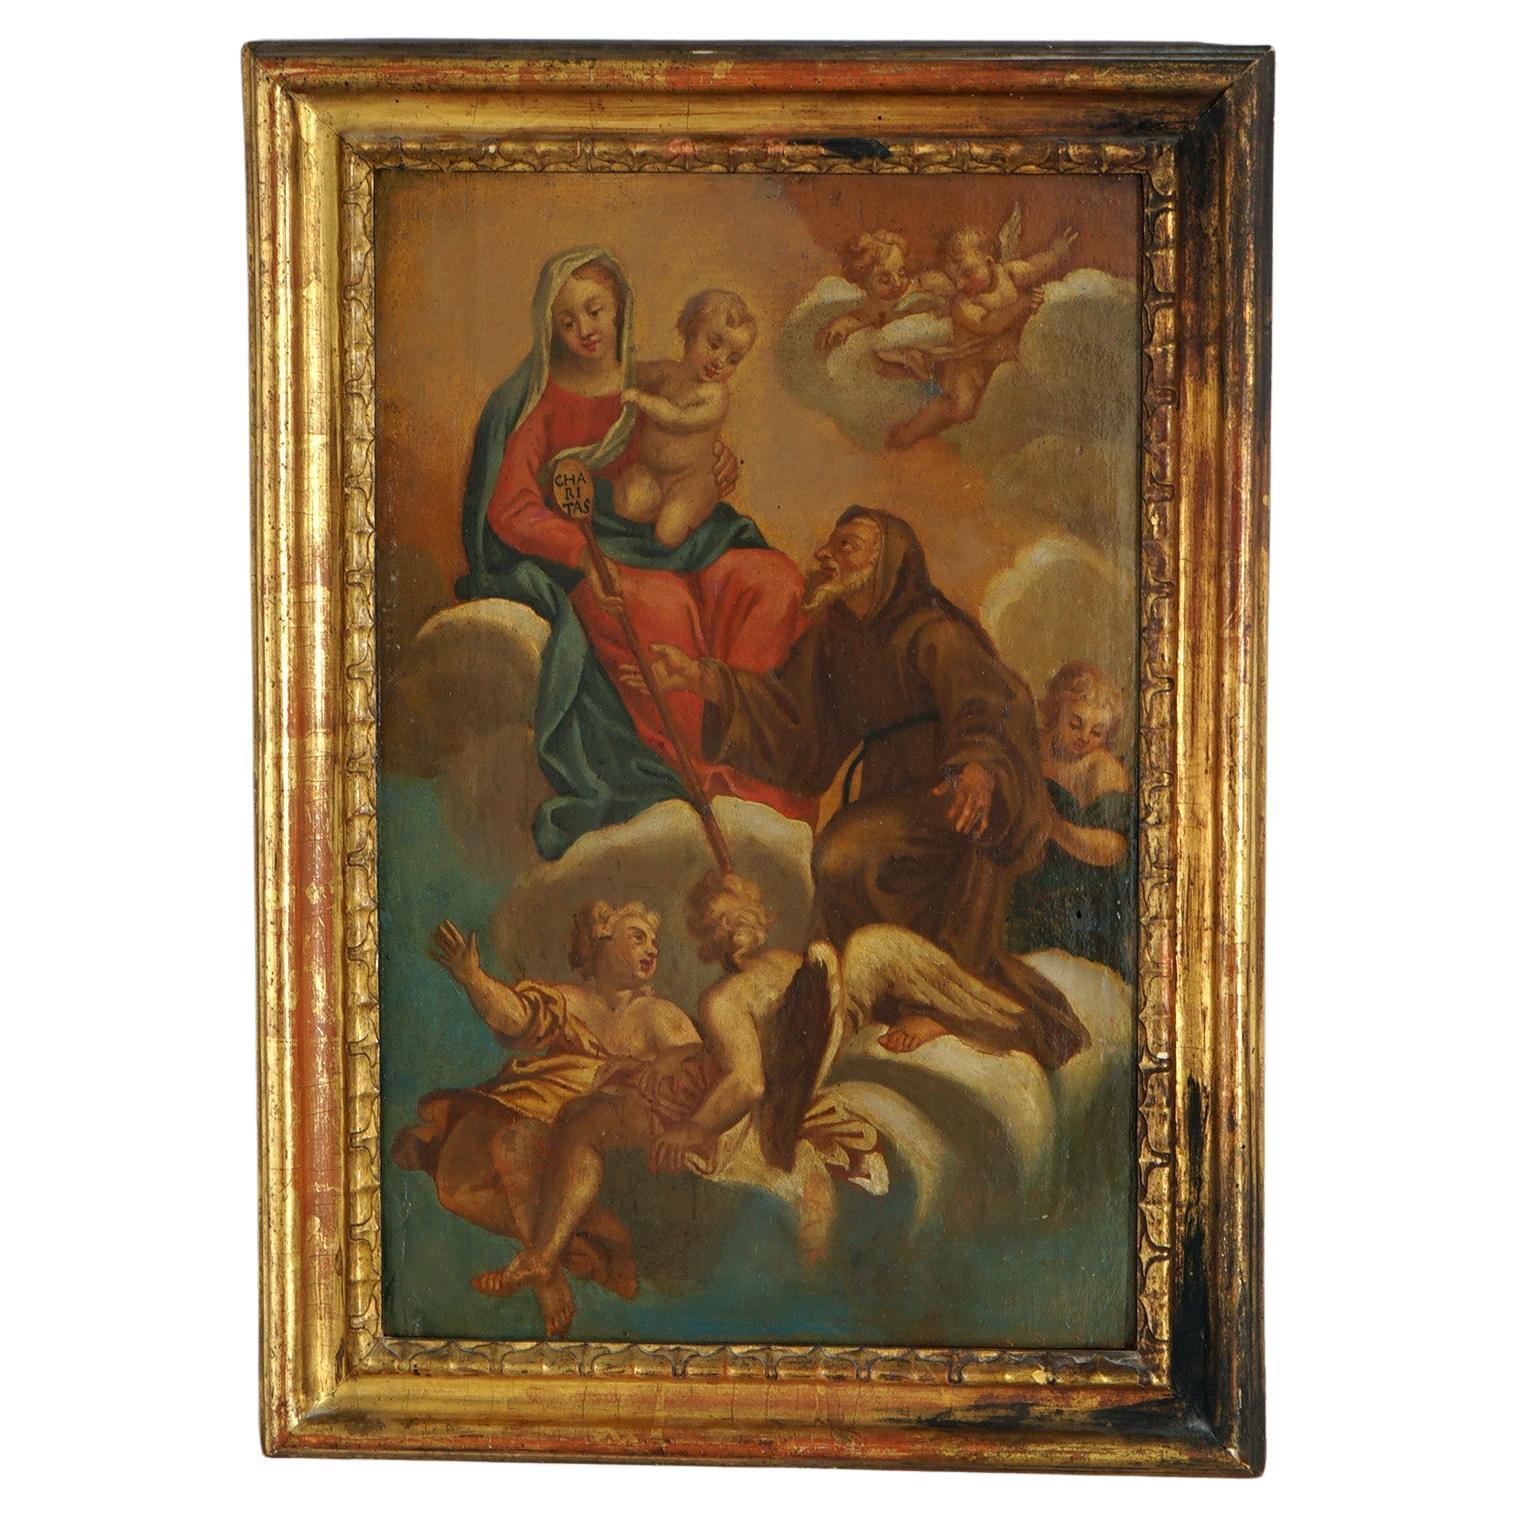 Antique Oil on Wood Panel Painting of Madonna & Child 18th-19th C